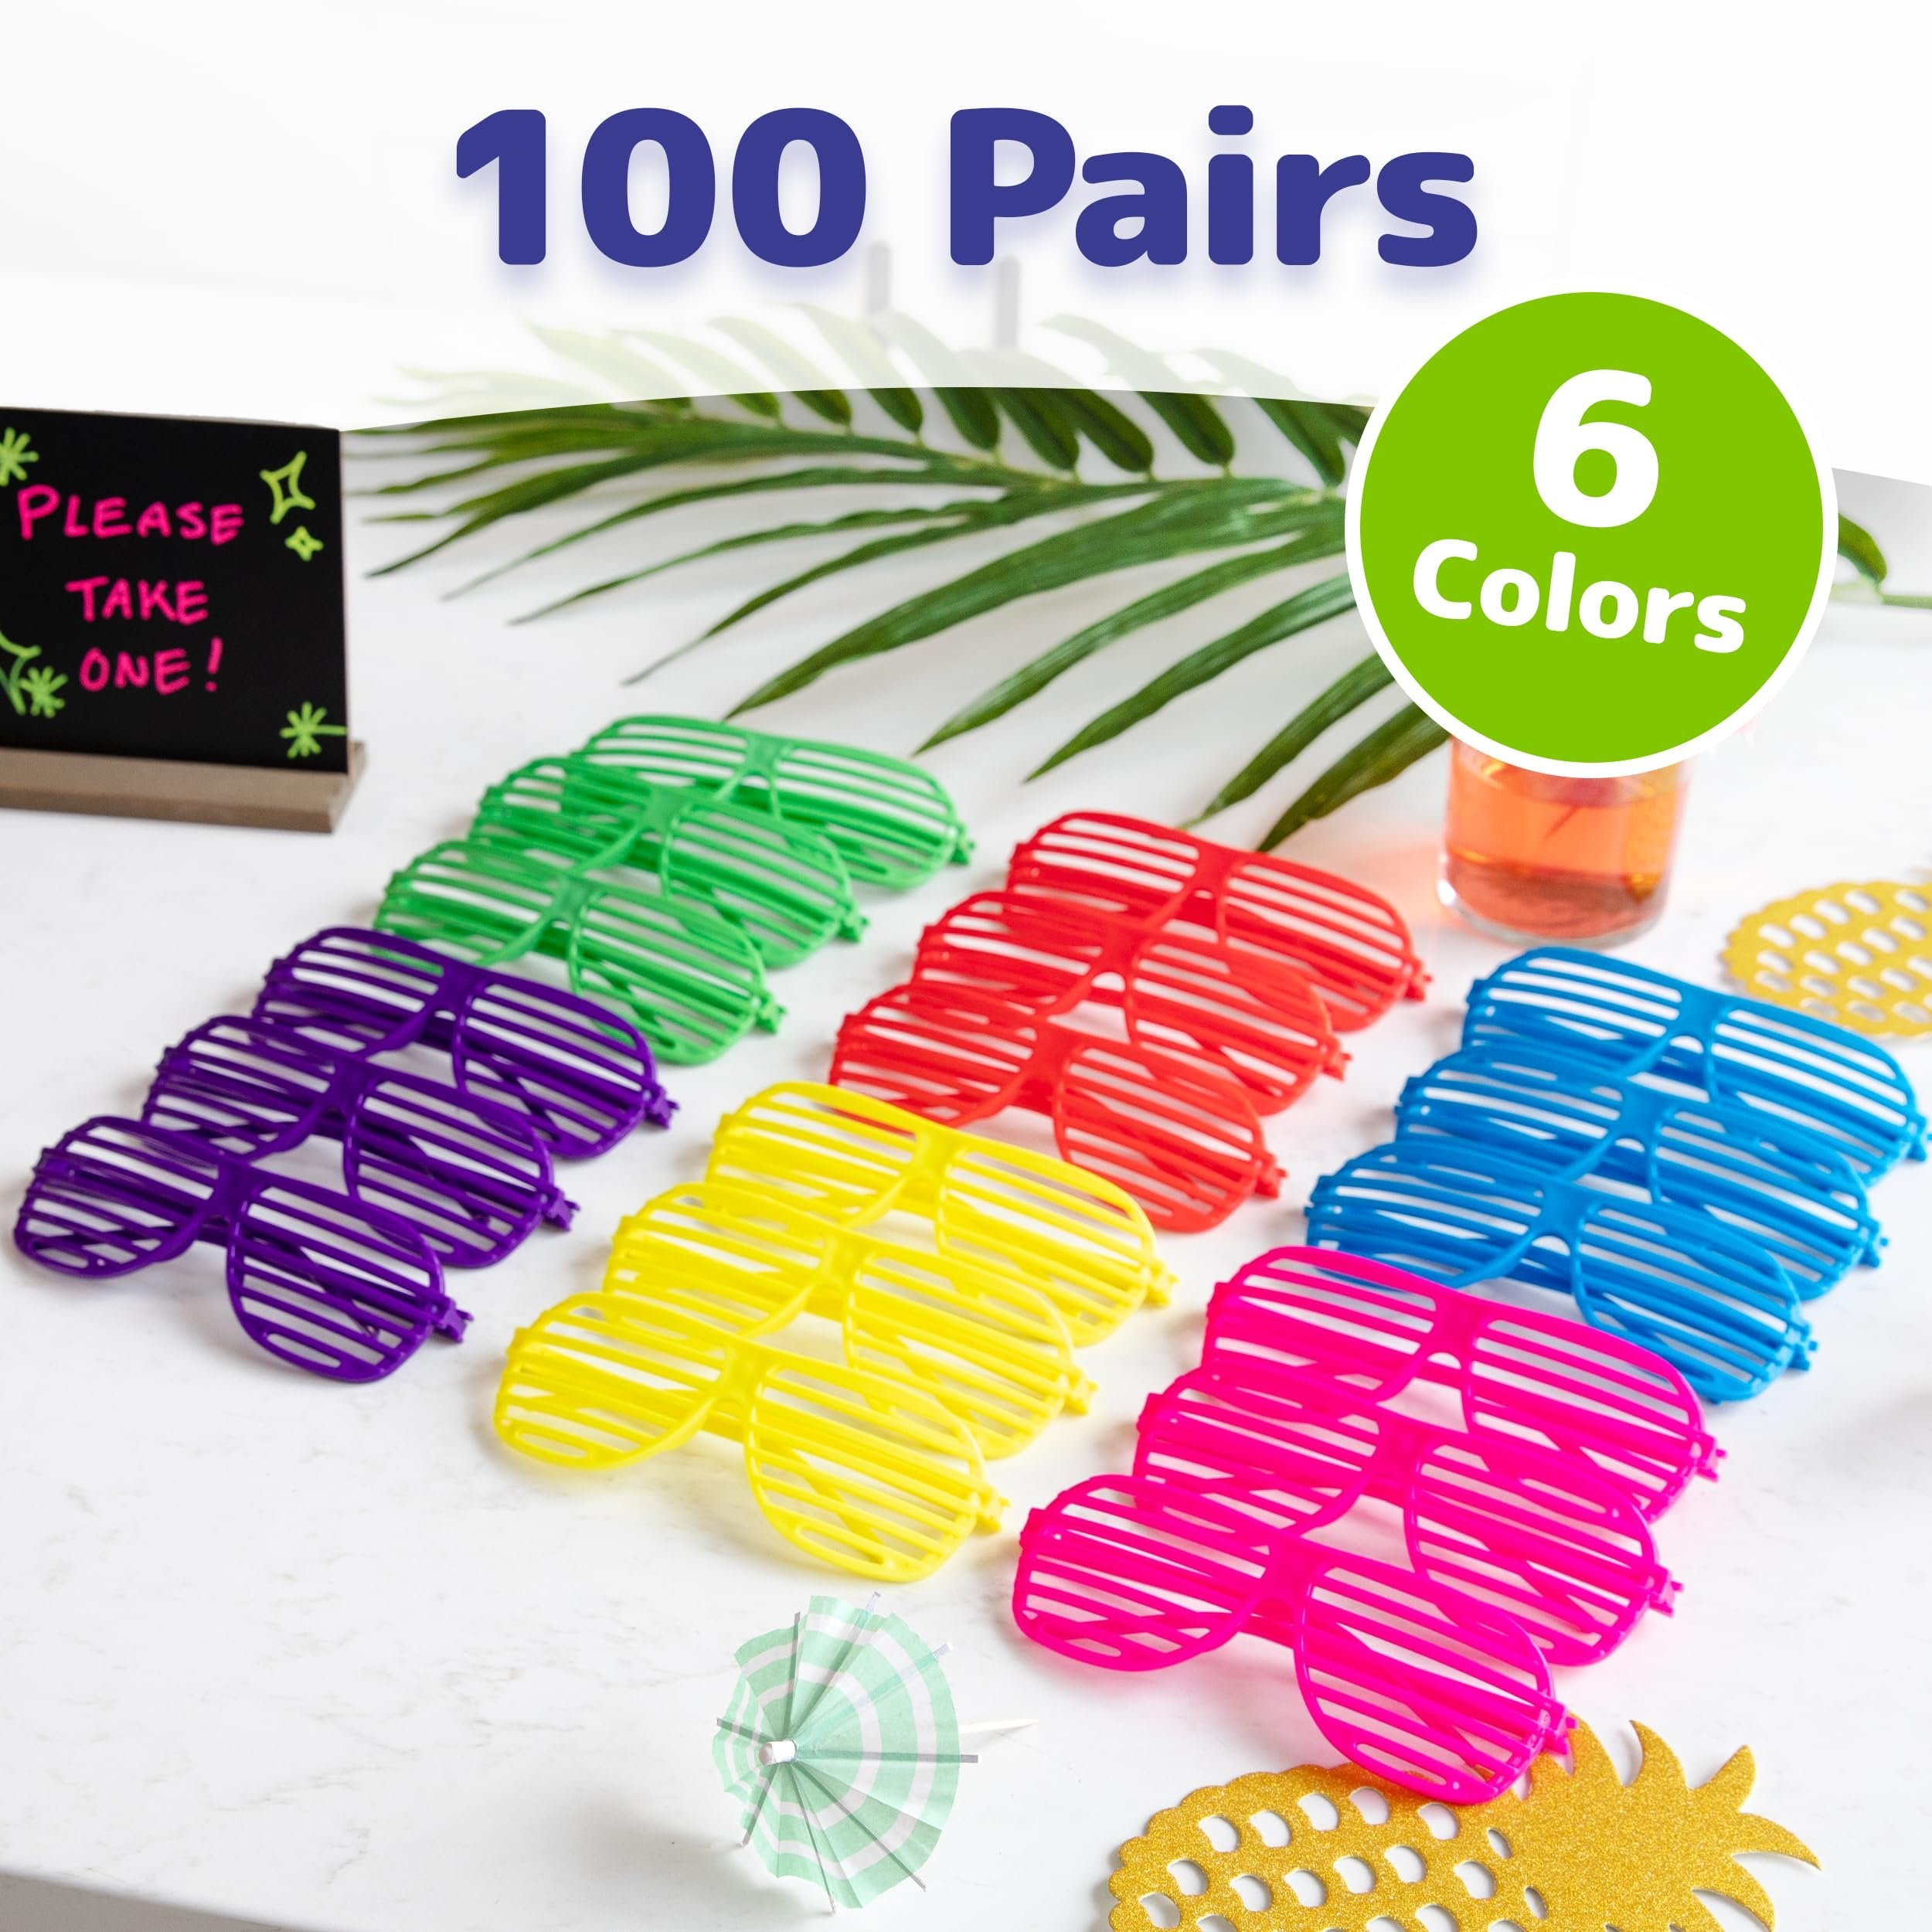 PREXTEX Mega Pack 100 Pairs of Kids Plastic Shutter Shades Glasses - Shades Sunglasses - Eyewear Party Favors and Party Props - Assorted Colors - Last Day of School Gifts for Kids